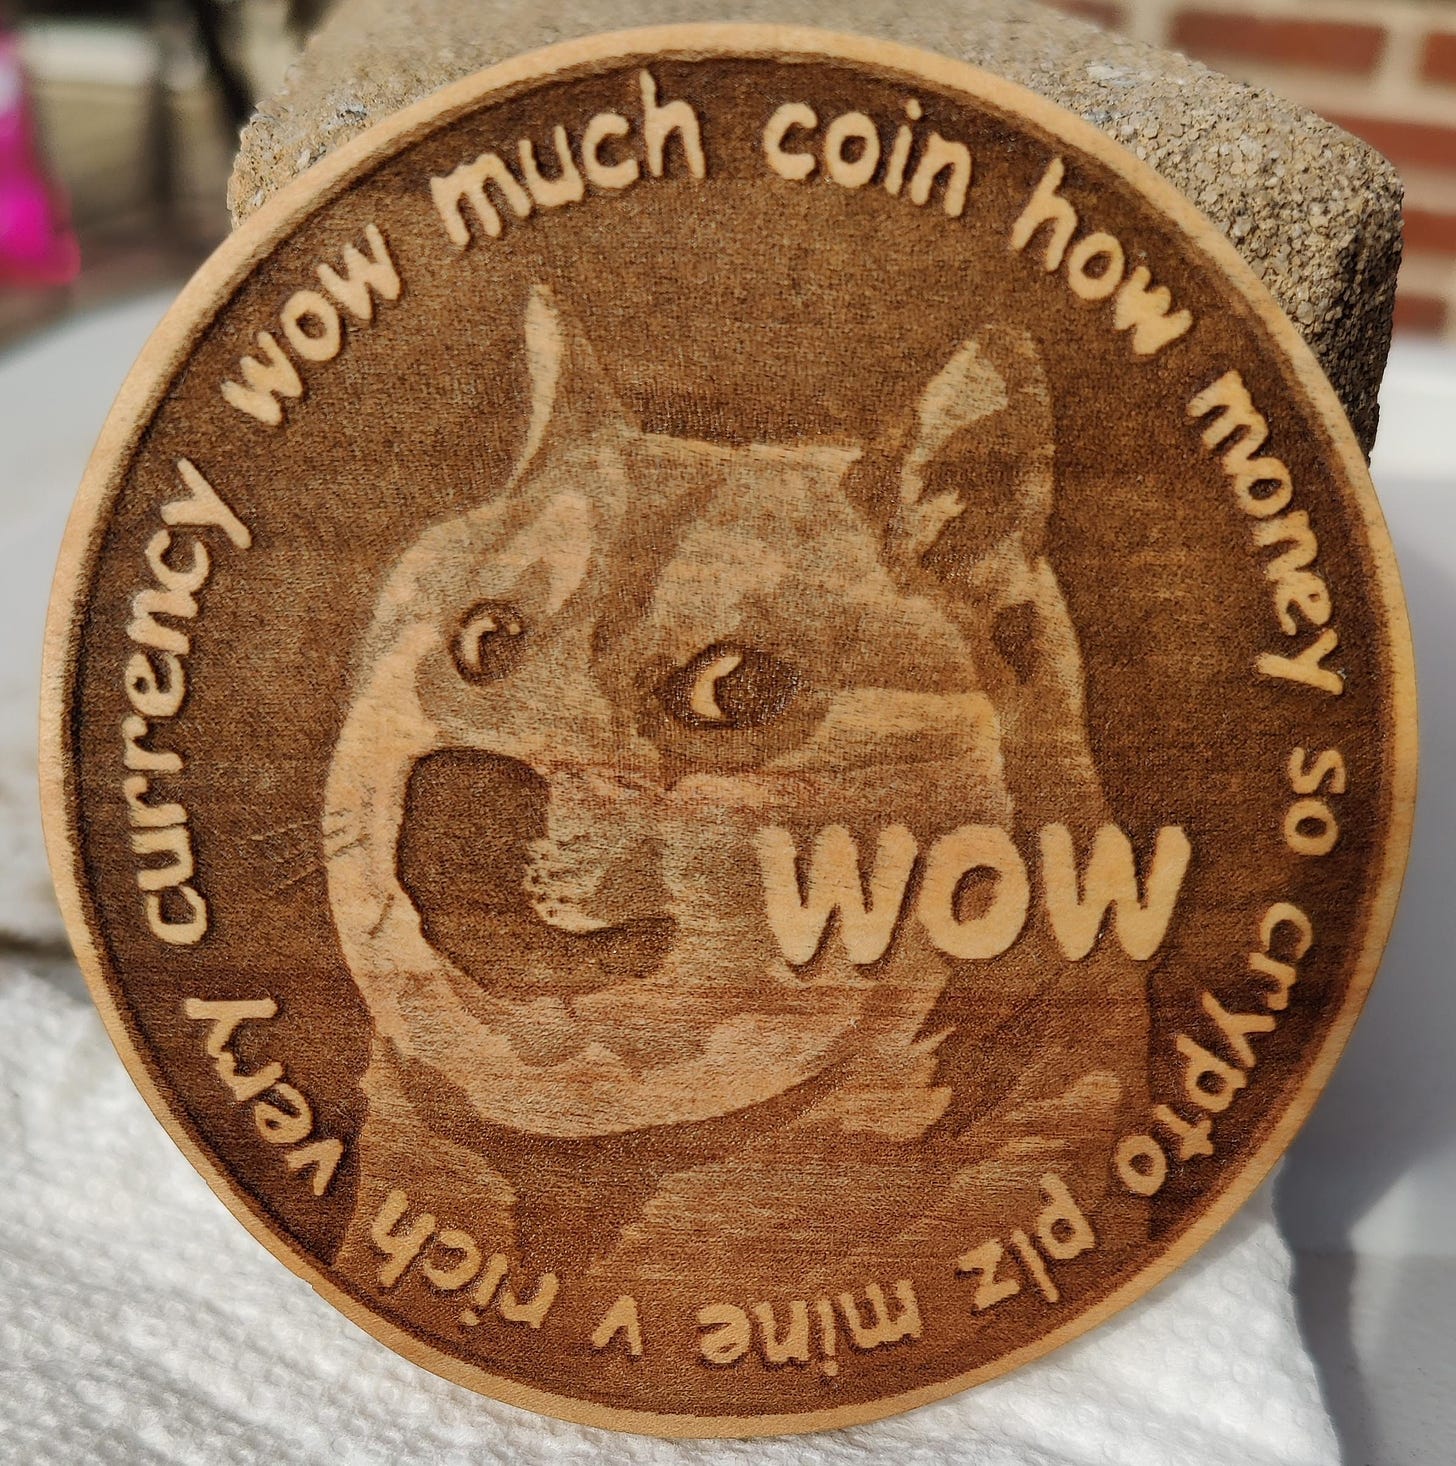 A wooden dogecoin for luck for us to have a steady ride. : r/dogecoin